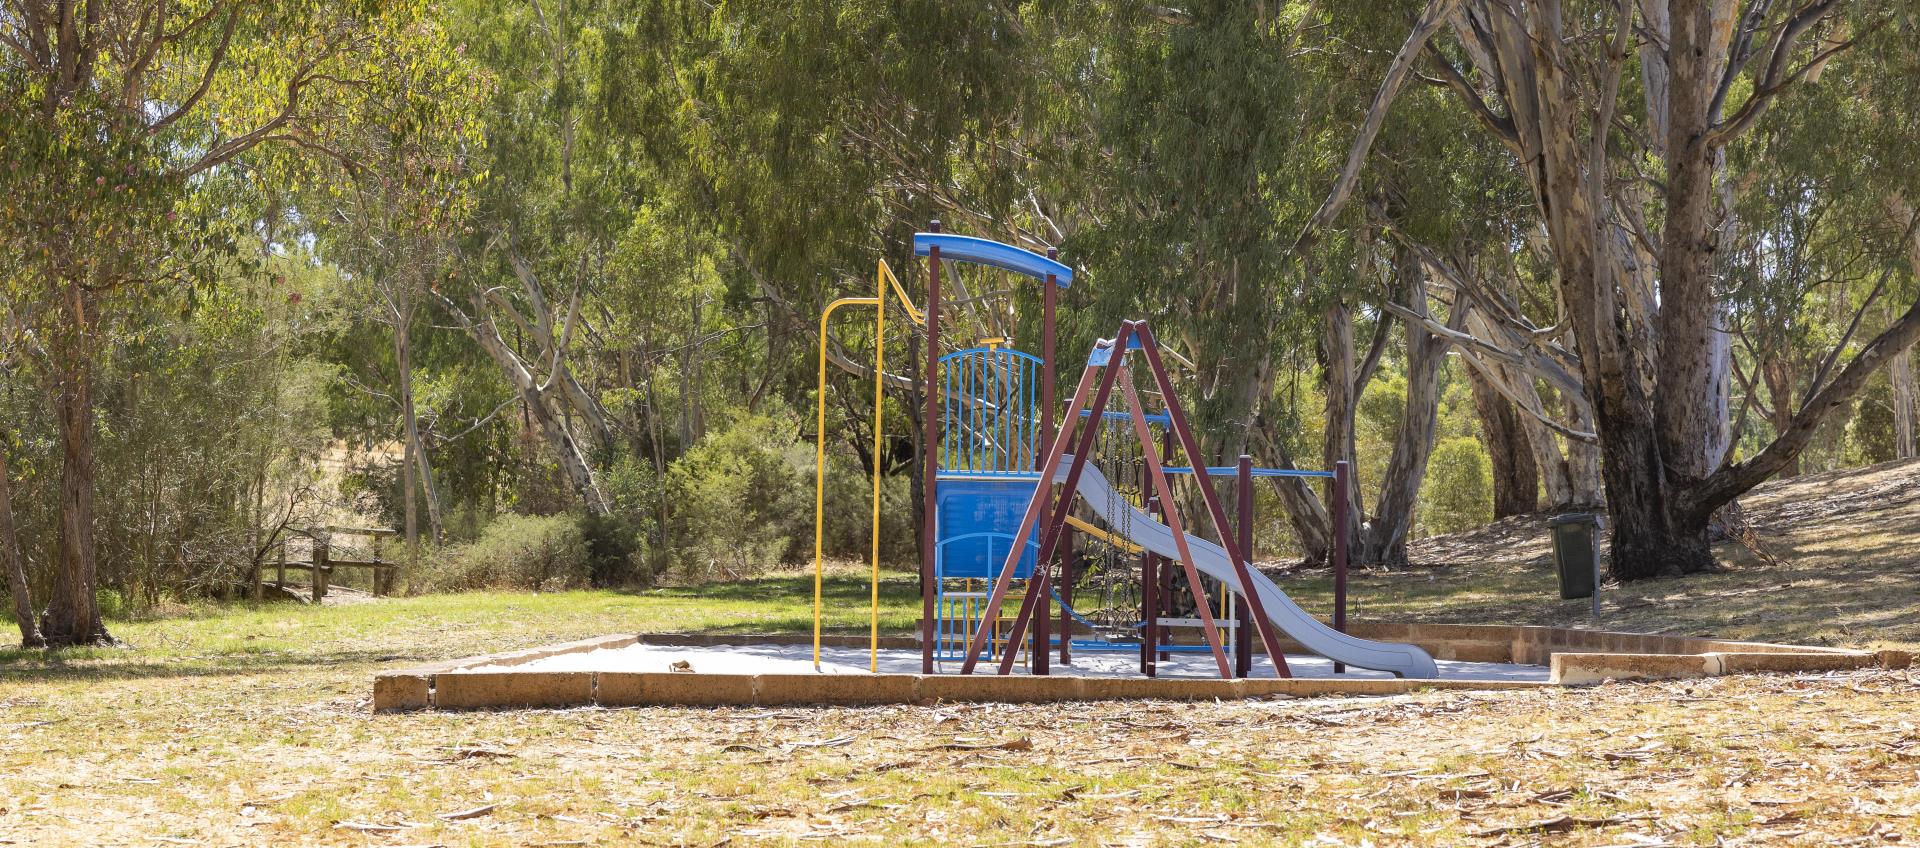 From the bush to suburbia – the Parks Team has it covered